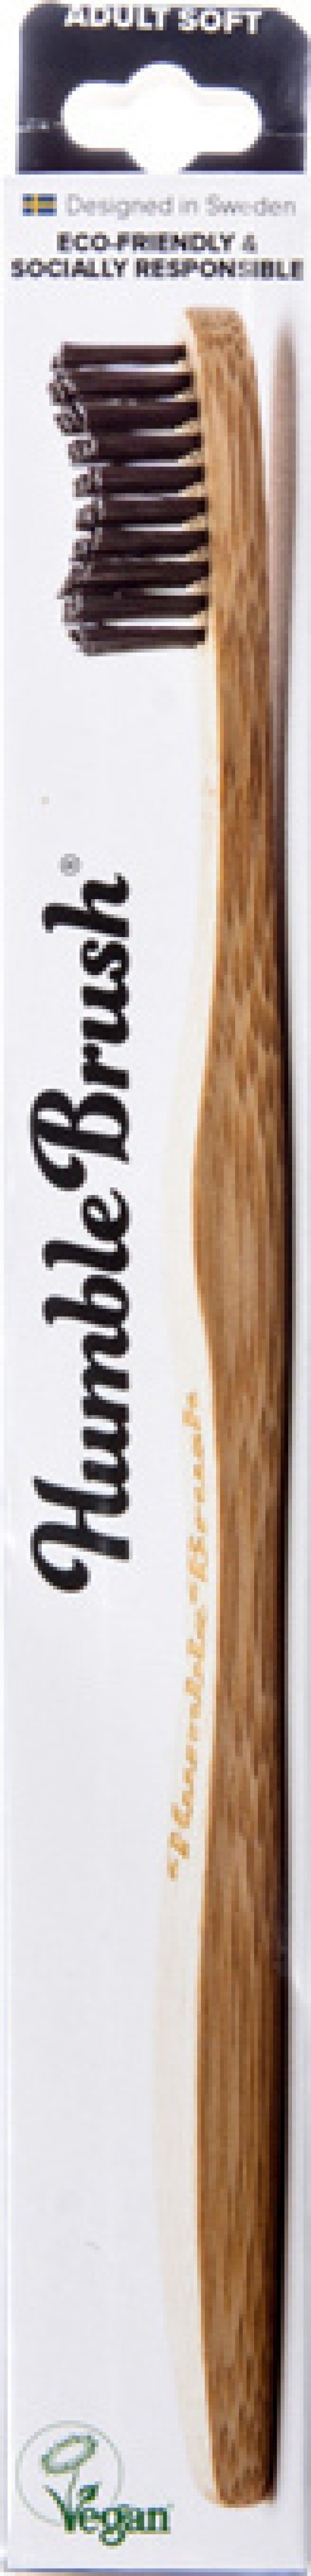 The Humble Co. Toothbrush Bamboo Black Μαύρη Οδοντόβουρτσα Απο Μπαμπού Adult Soft 1 τμχ product photo